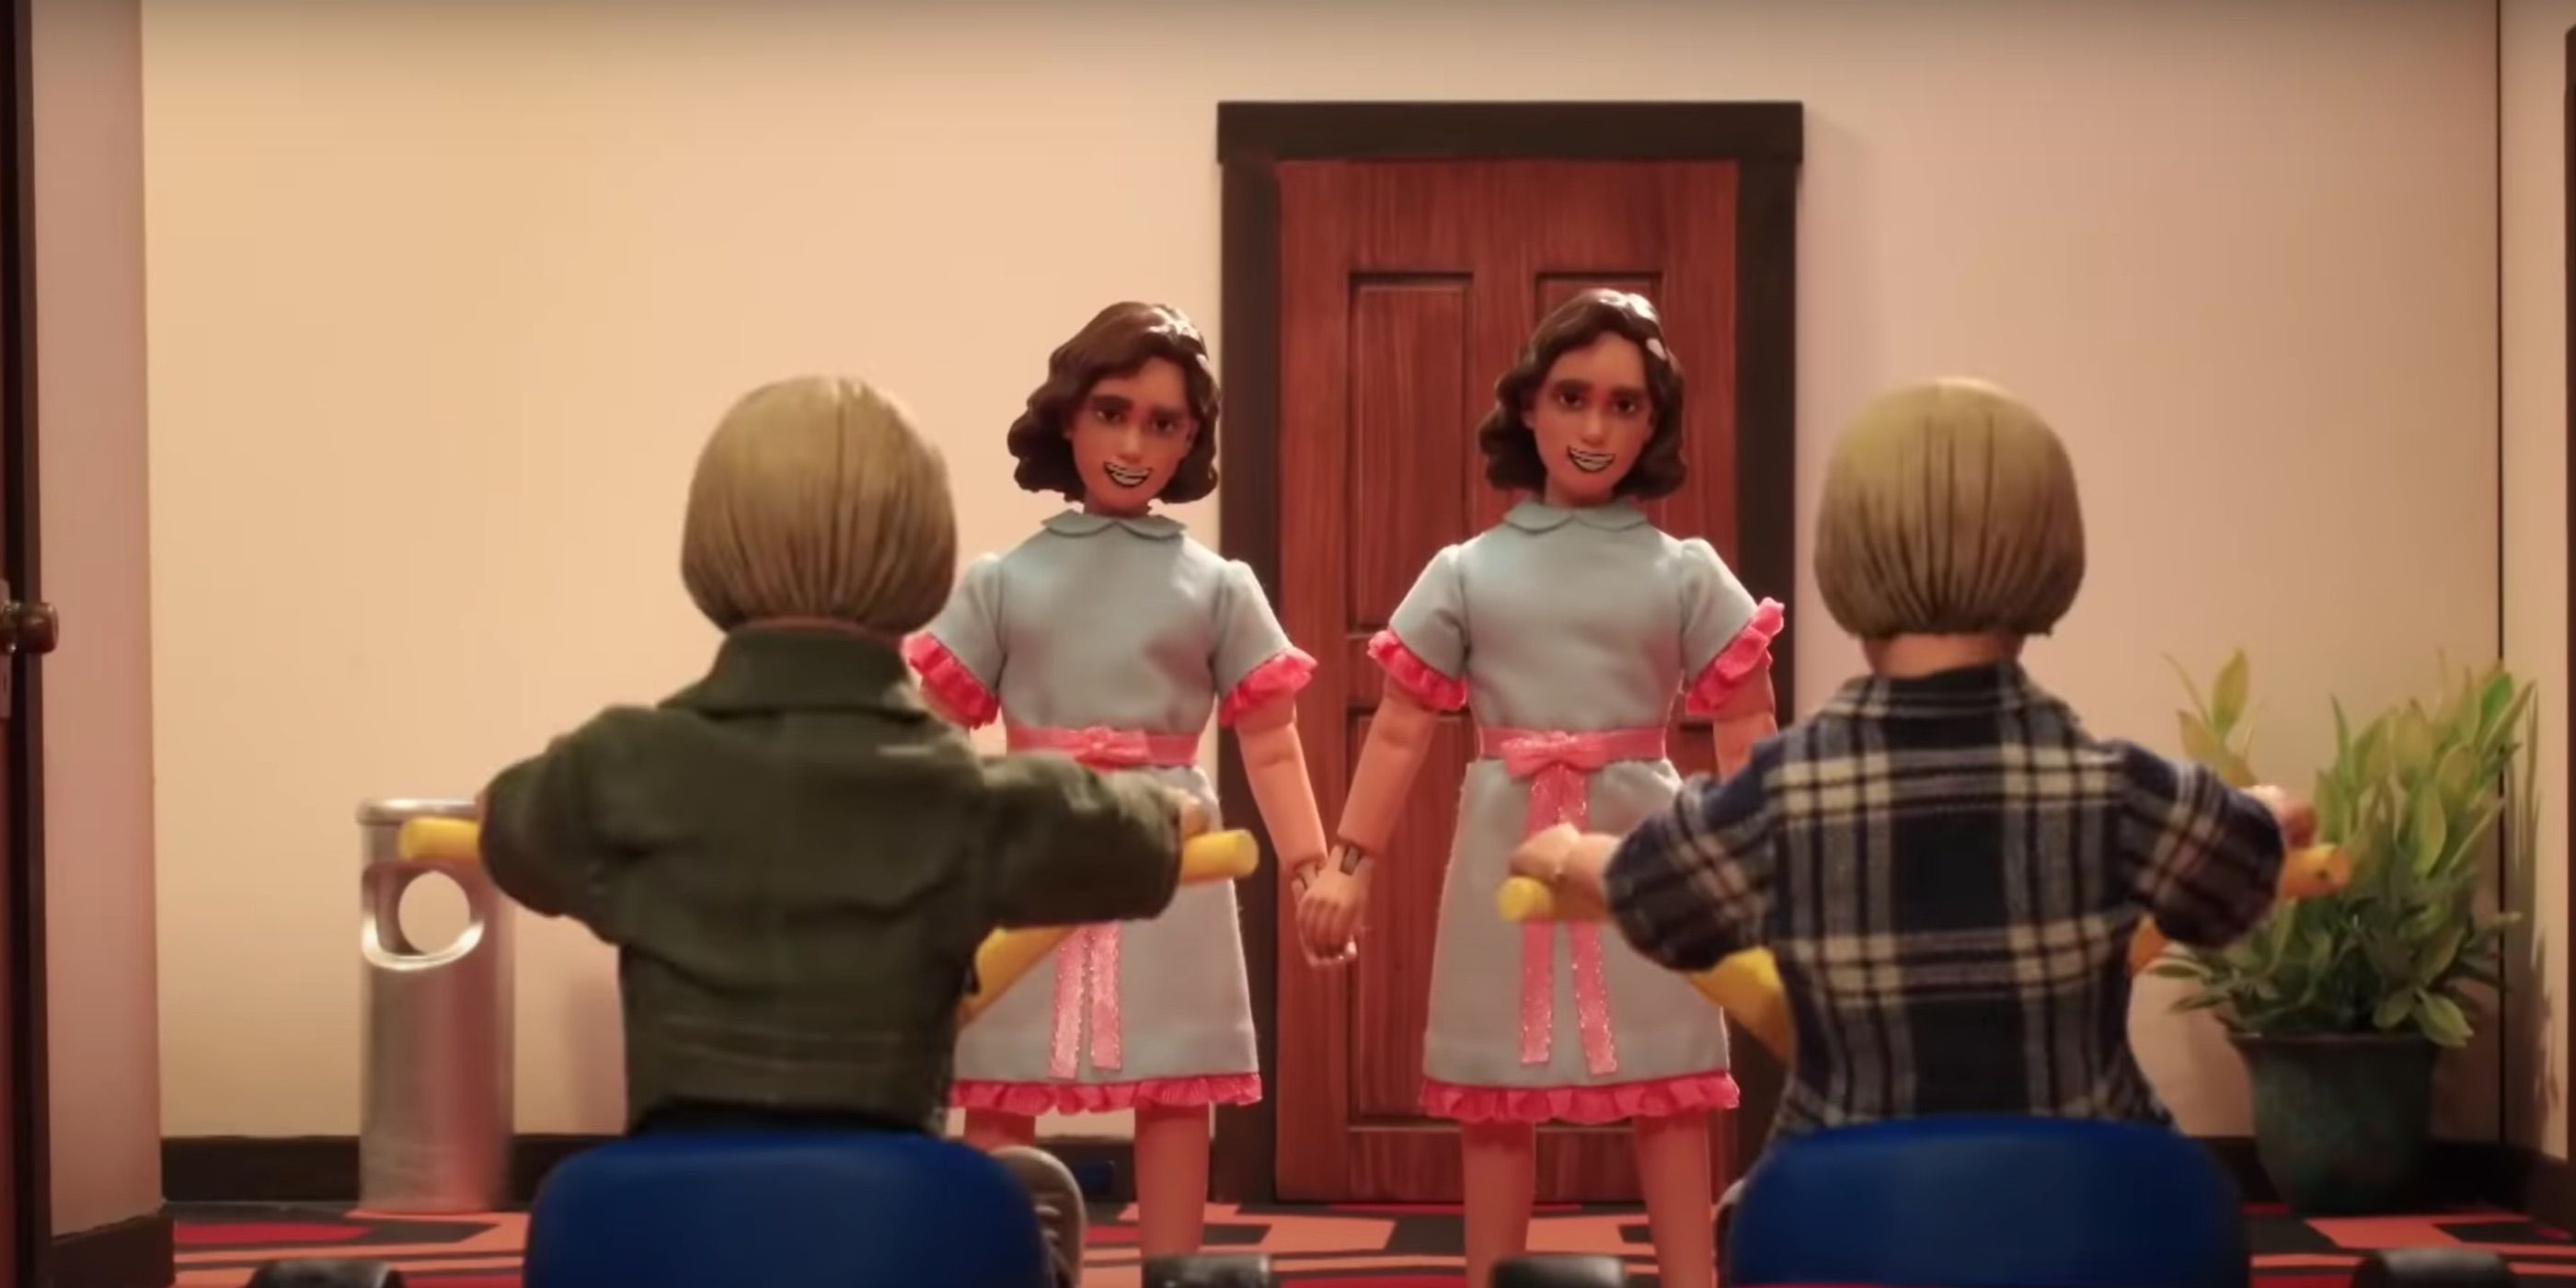 Robot Chicken Season 11 Release Date Revealed With New Trailer